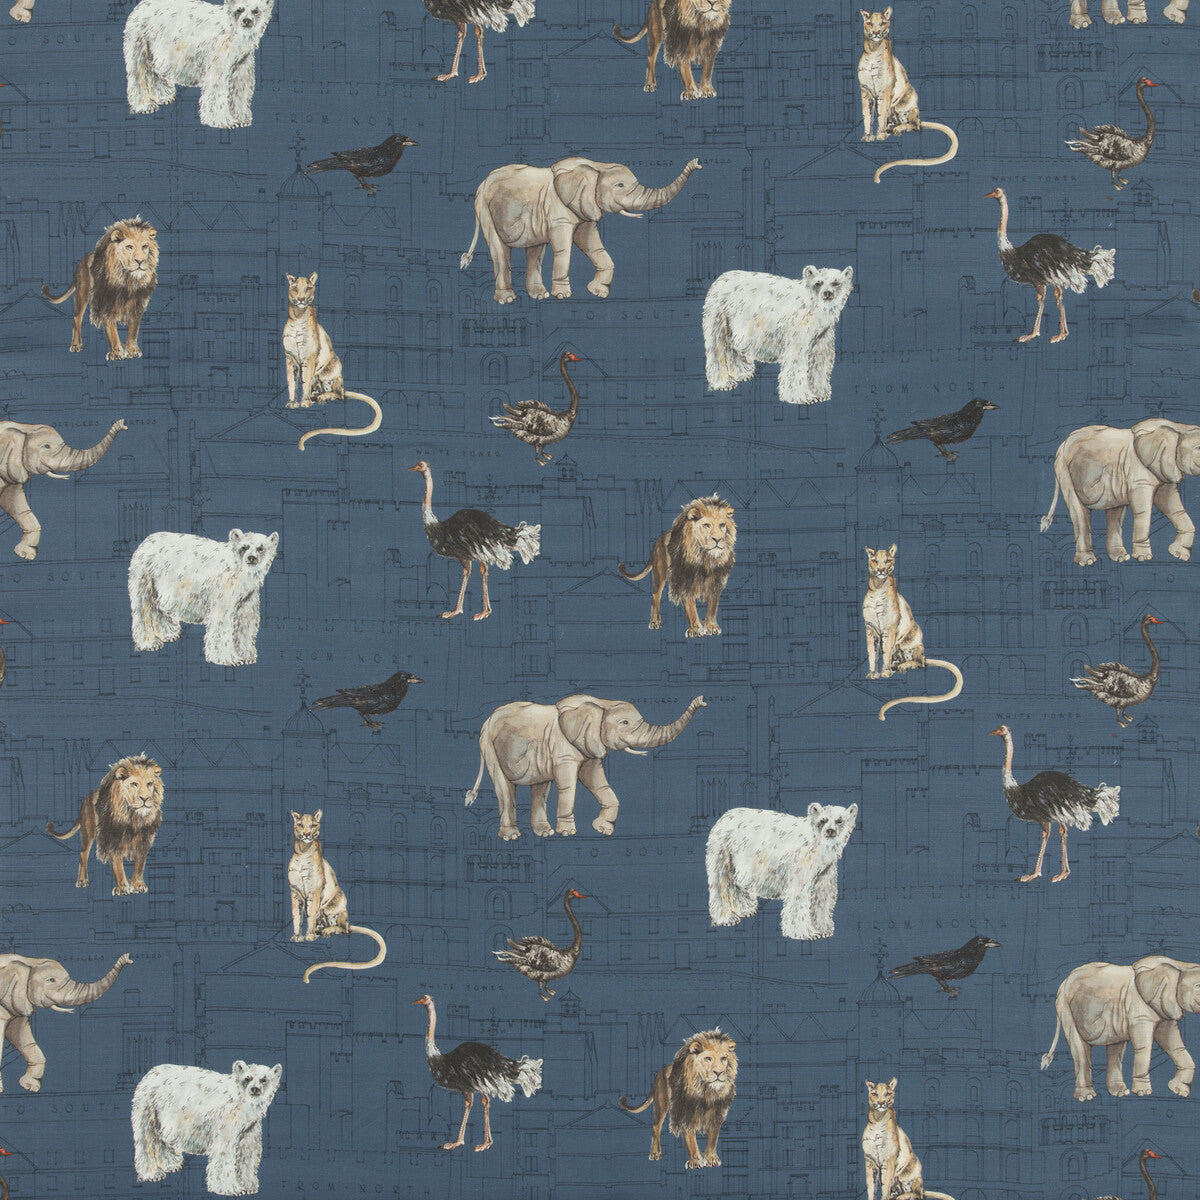 Royal Beasts Linen fabric in sapphire color - pattern BP10675.2.0 - by G P &amp; J Baker in the Historic Royal Palaces collection